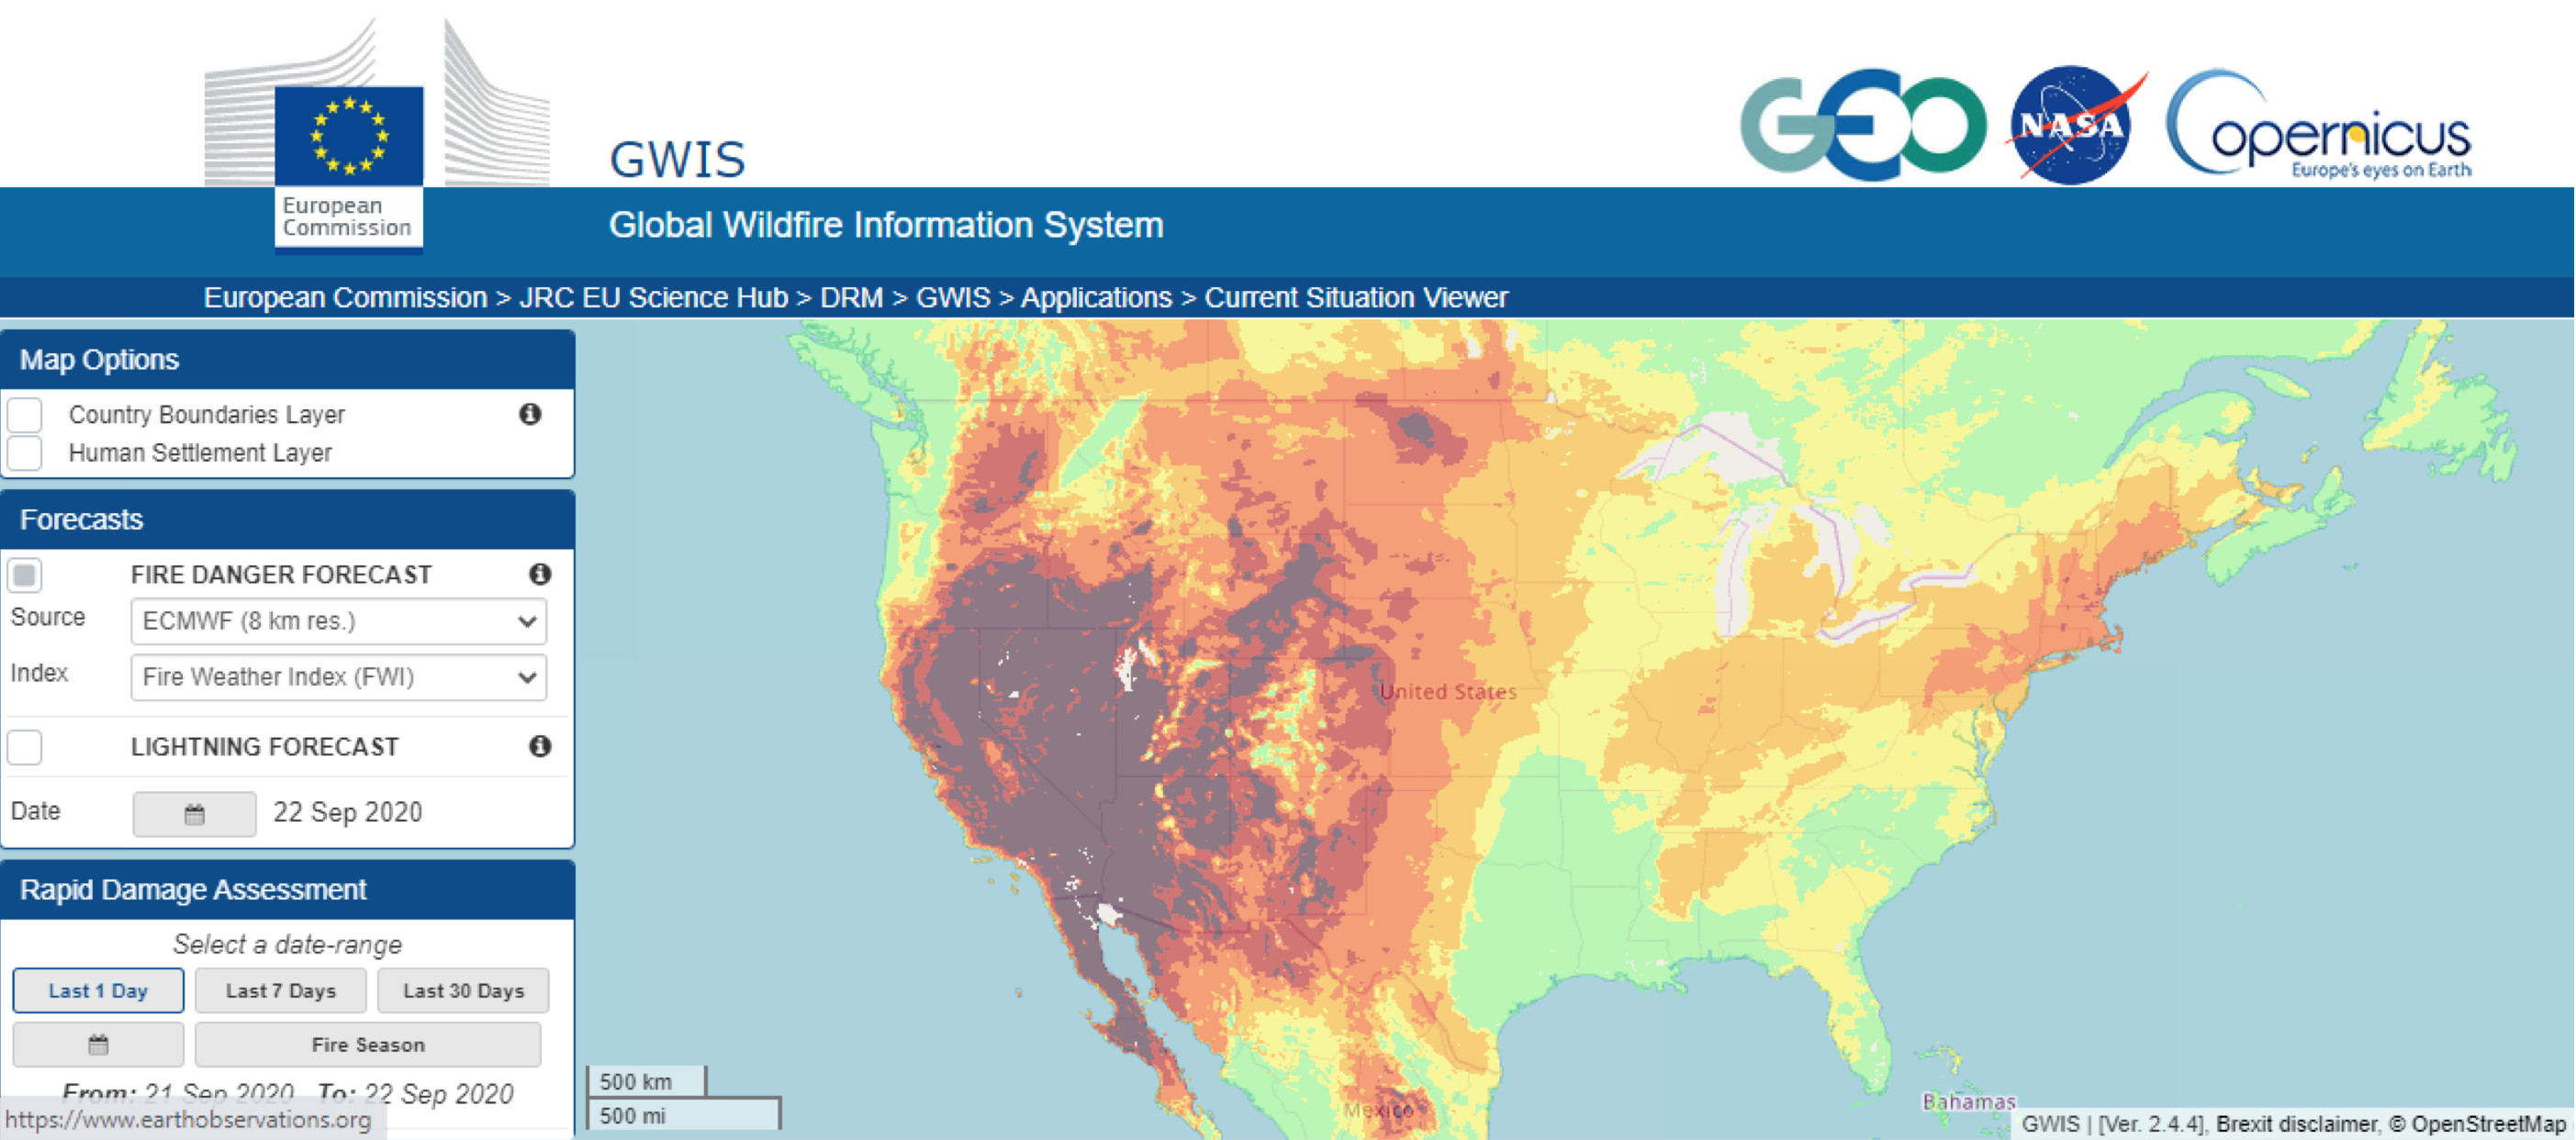 Image shows the Fire Danger Forecast in California and Oregon, USA from the Global Wildfire Information System (GWIS) as of September 22, 2020.